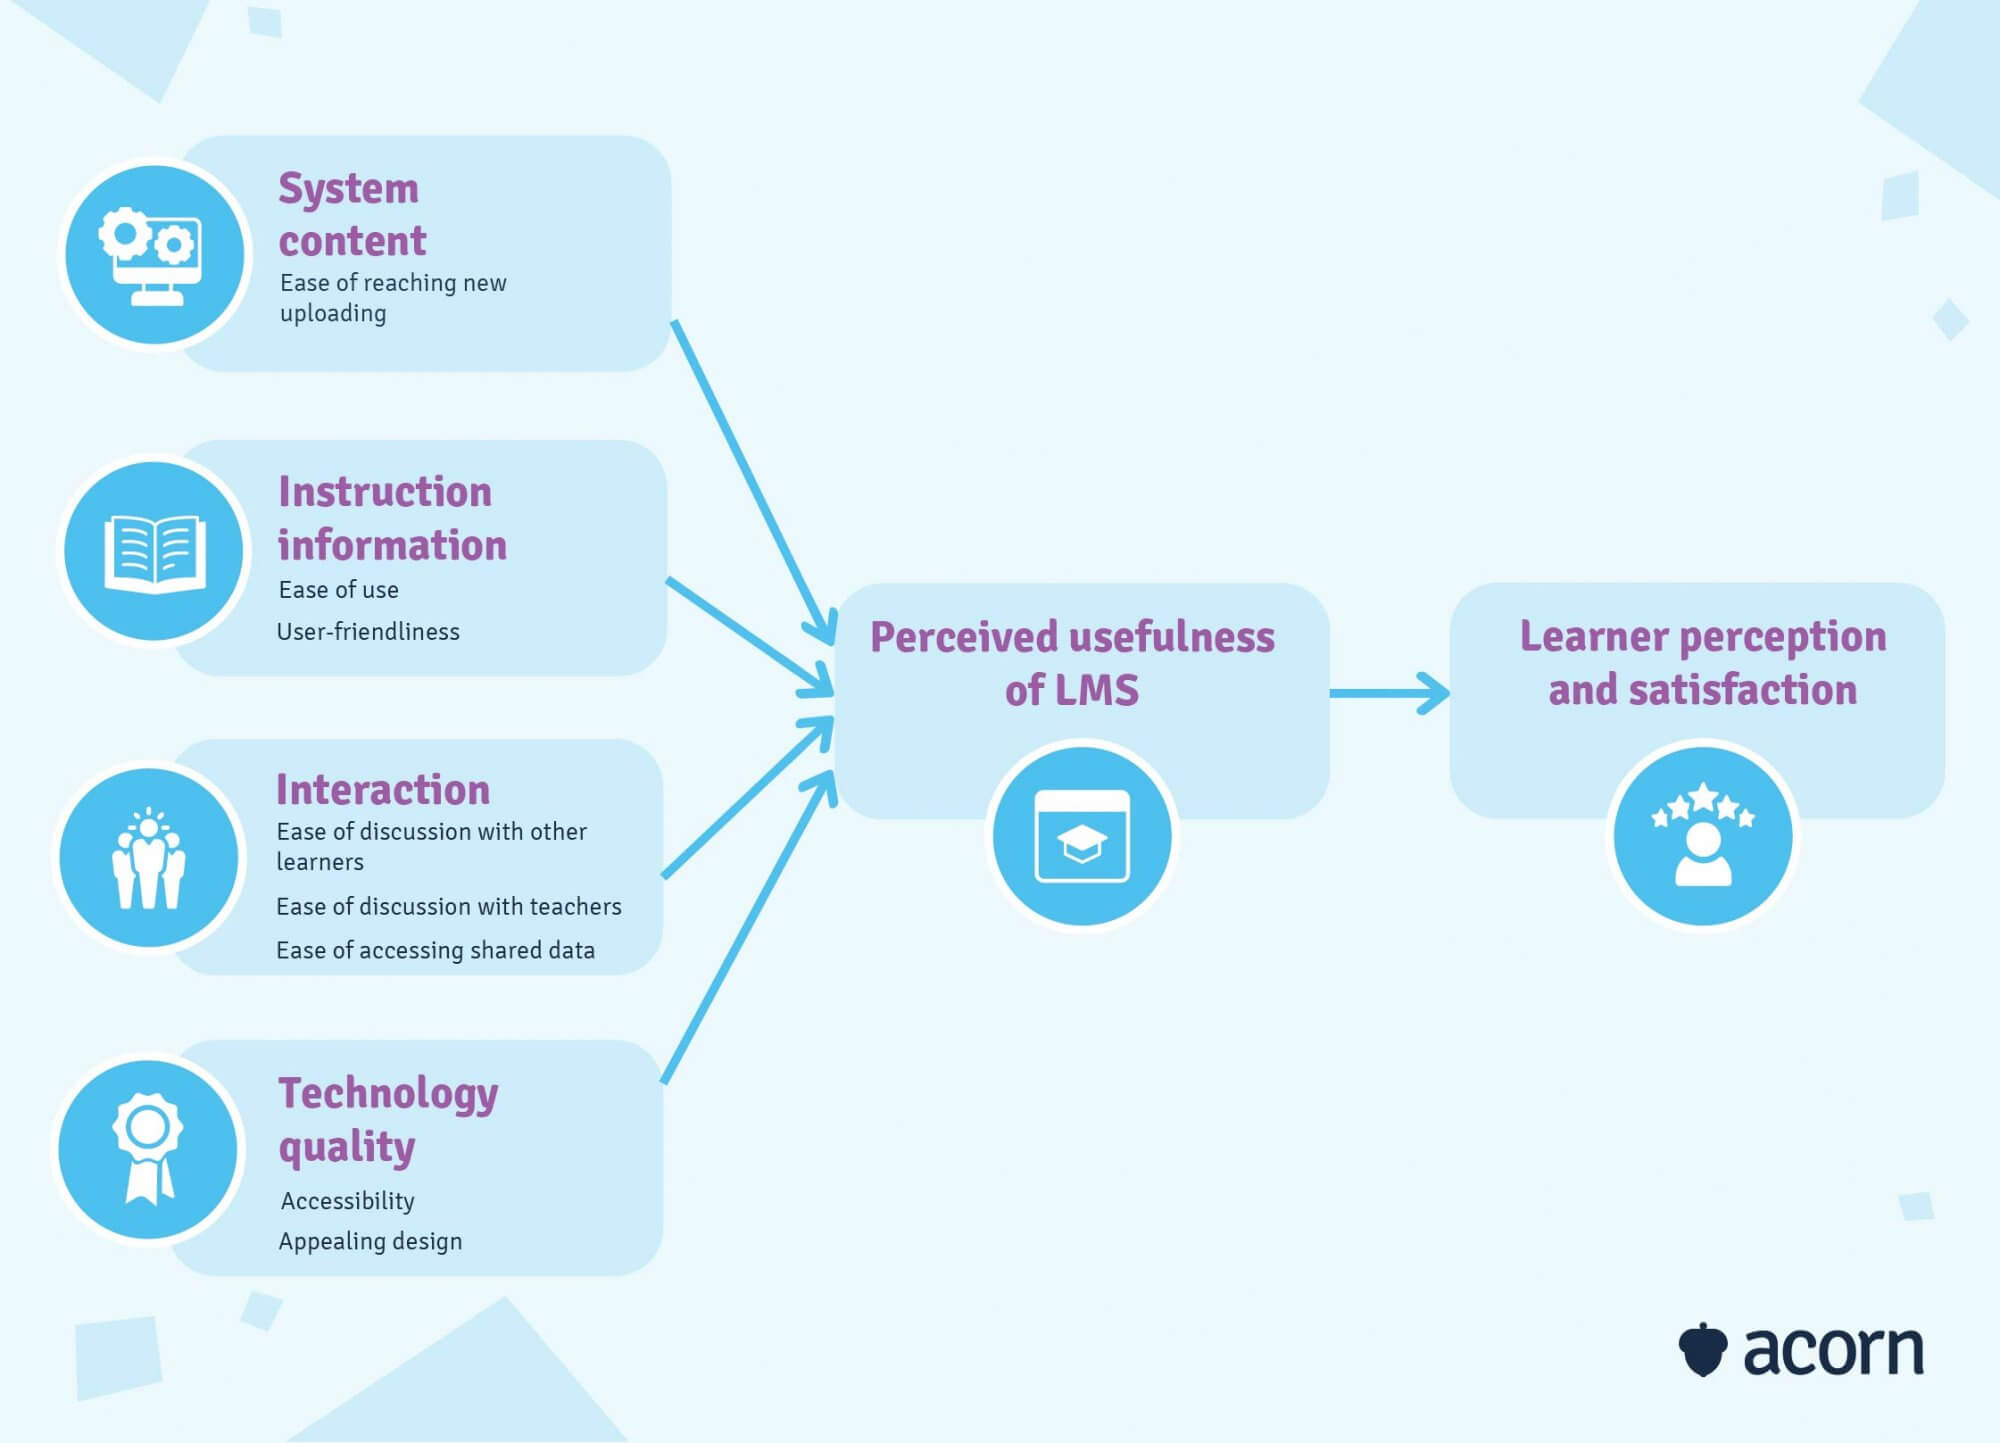 infographic showing the elements of user experience that impact learner satisfaction